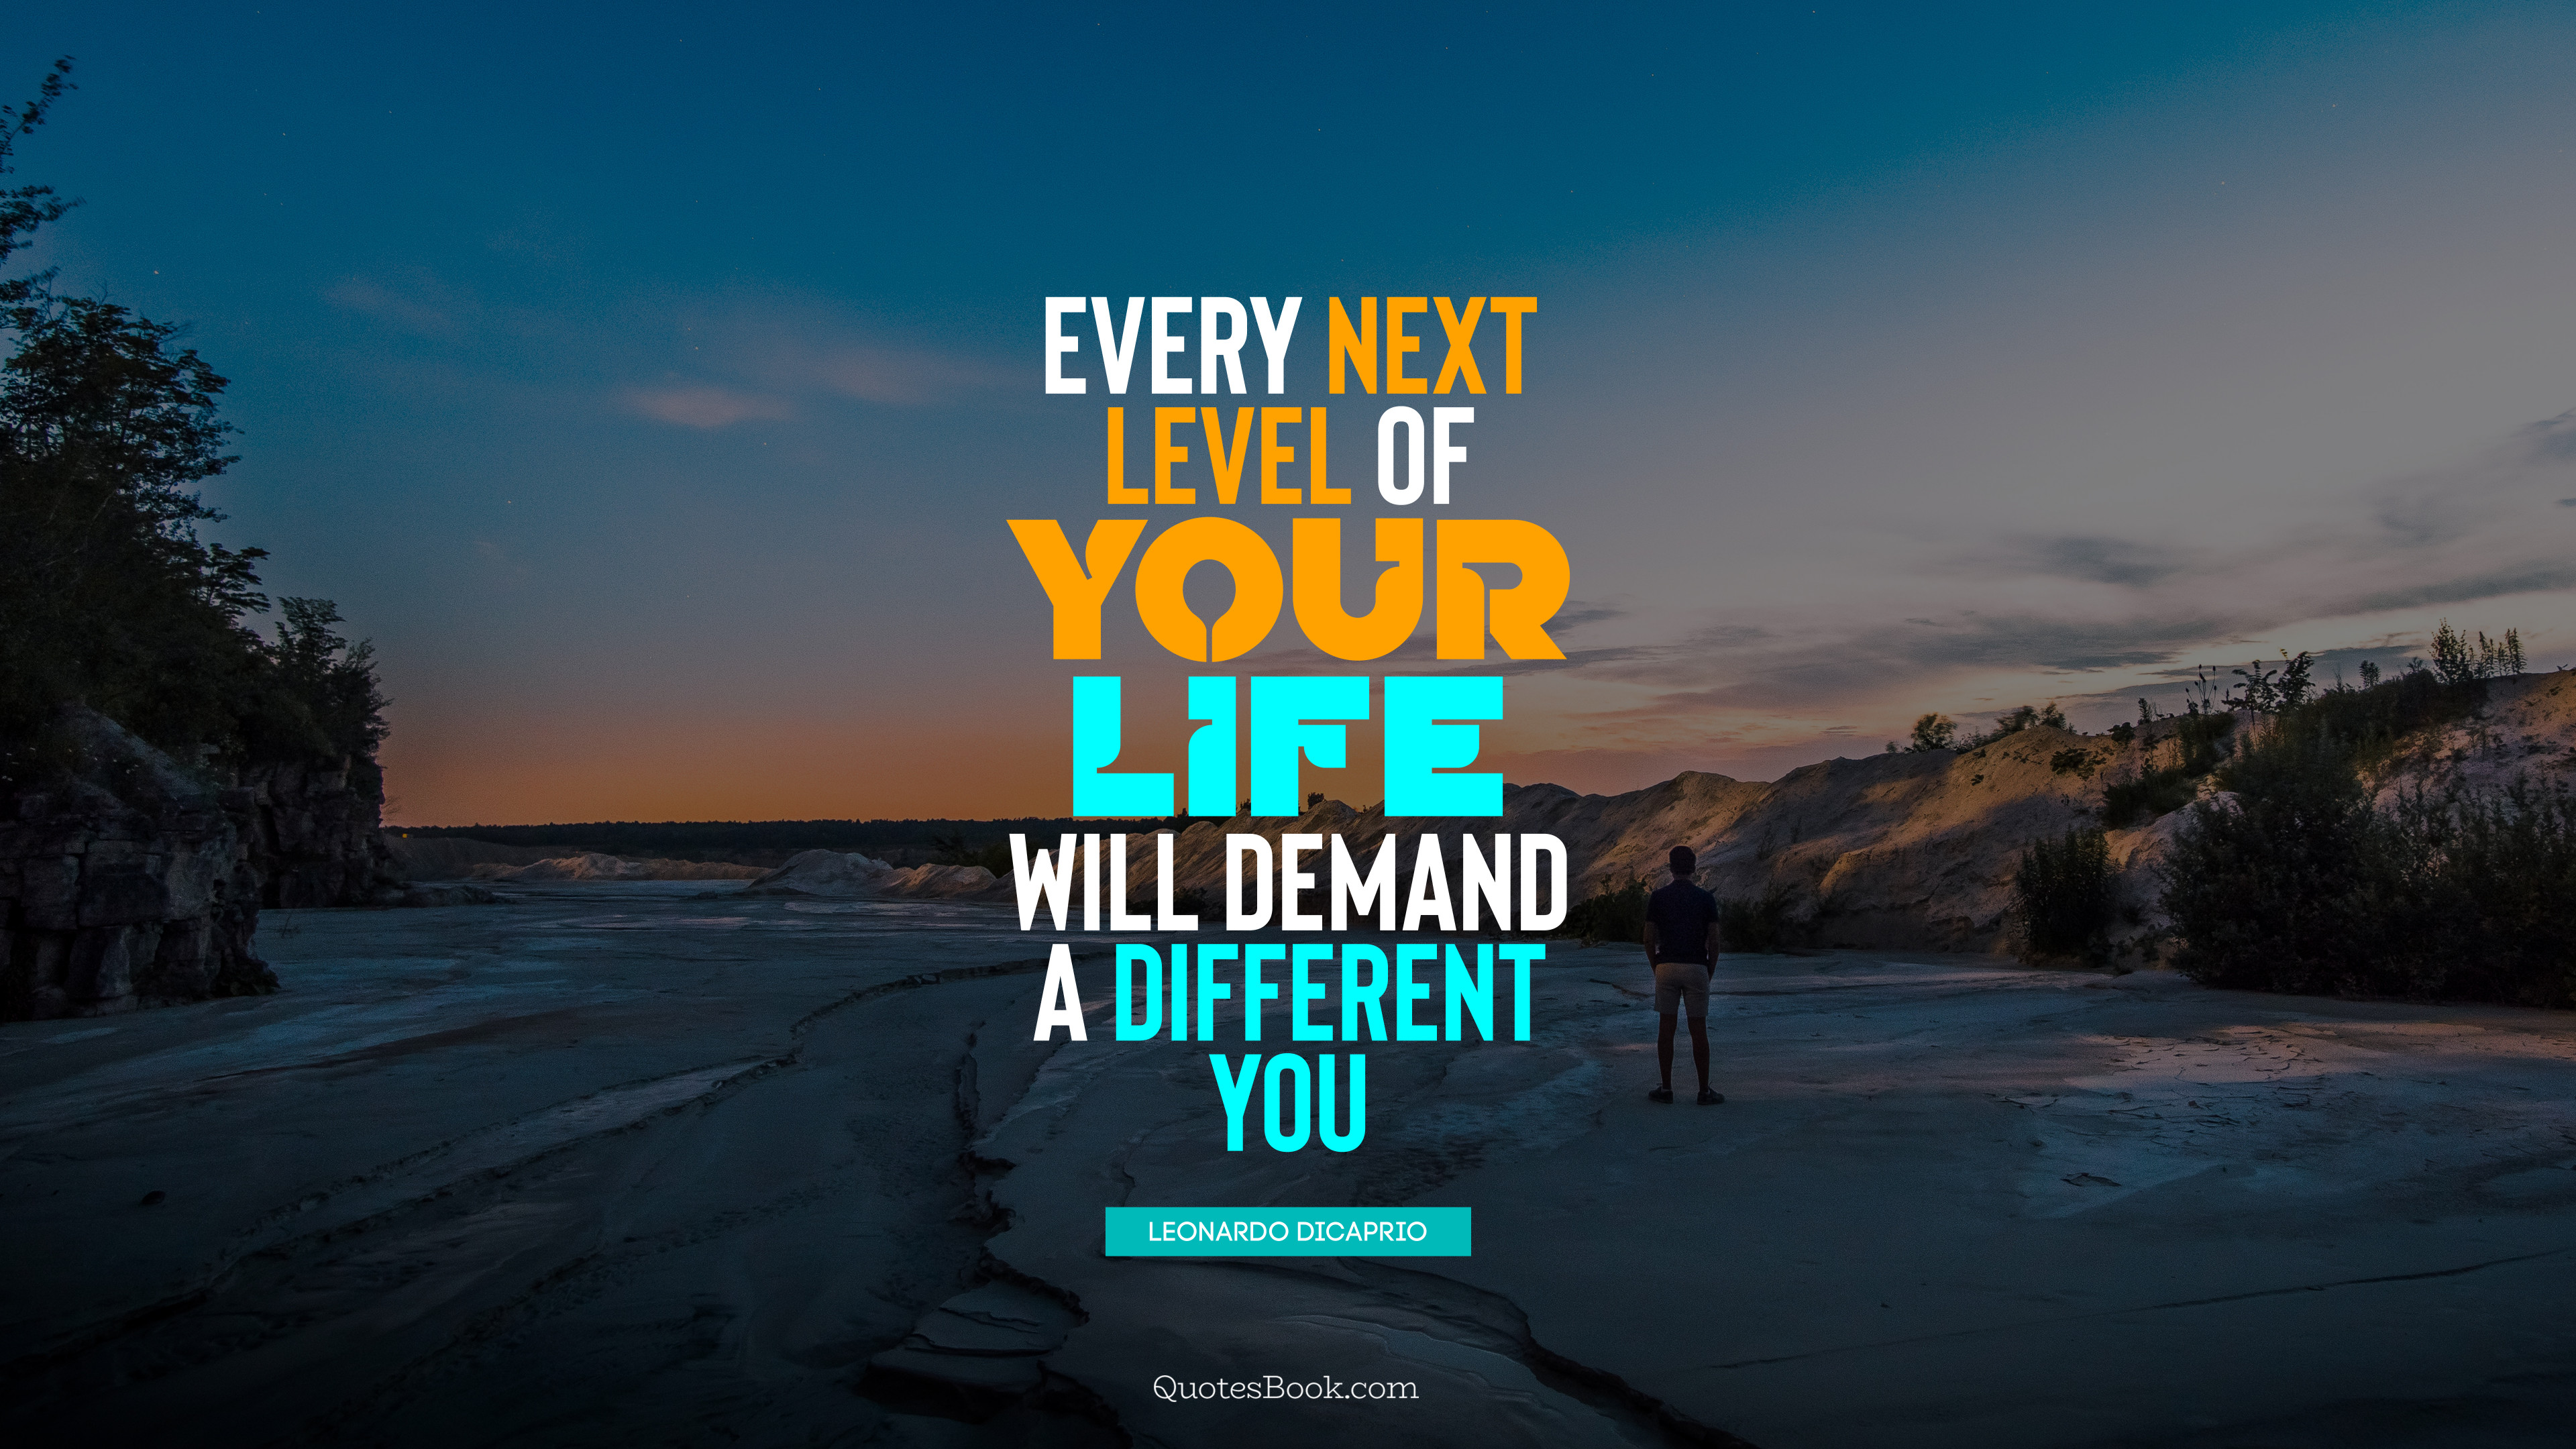 Every next level of your life will demand a different you. - Quote by ...